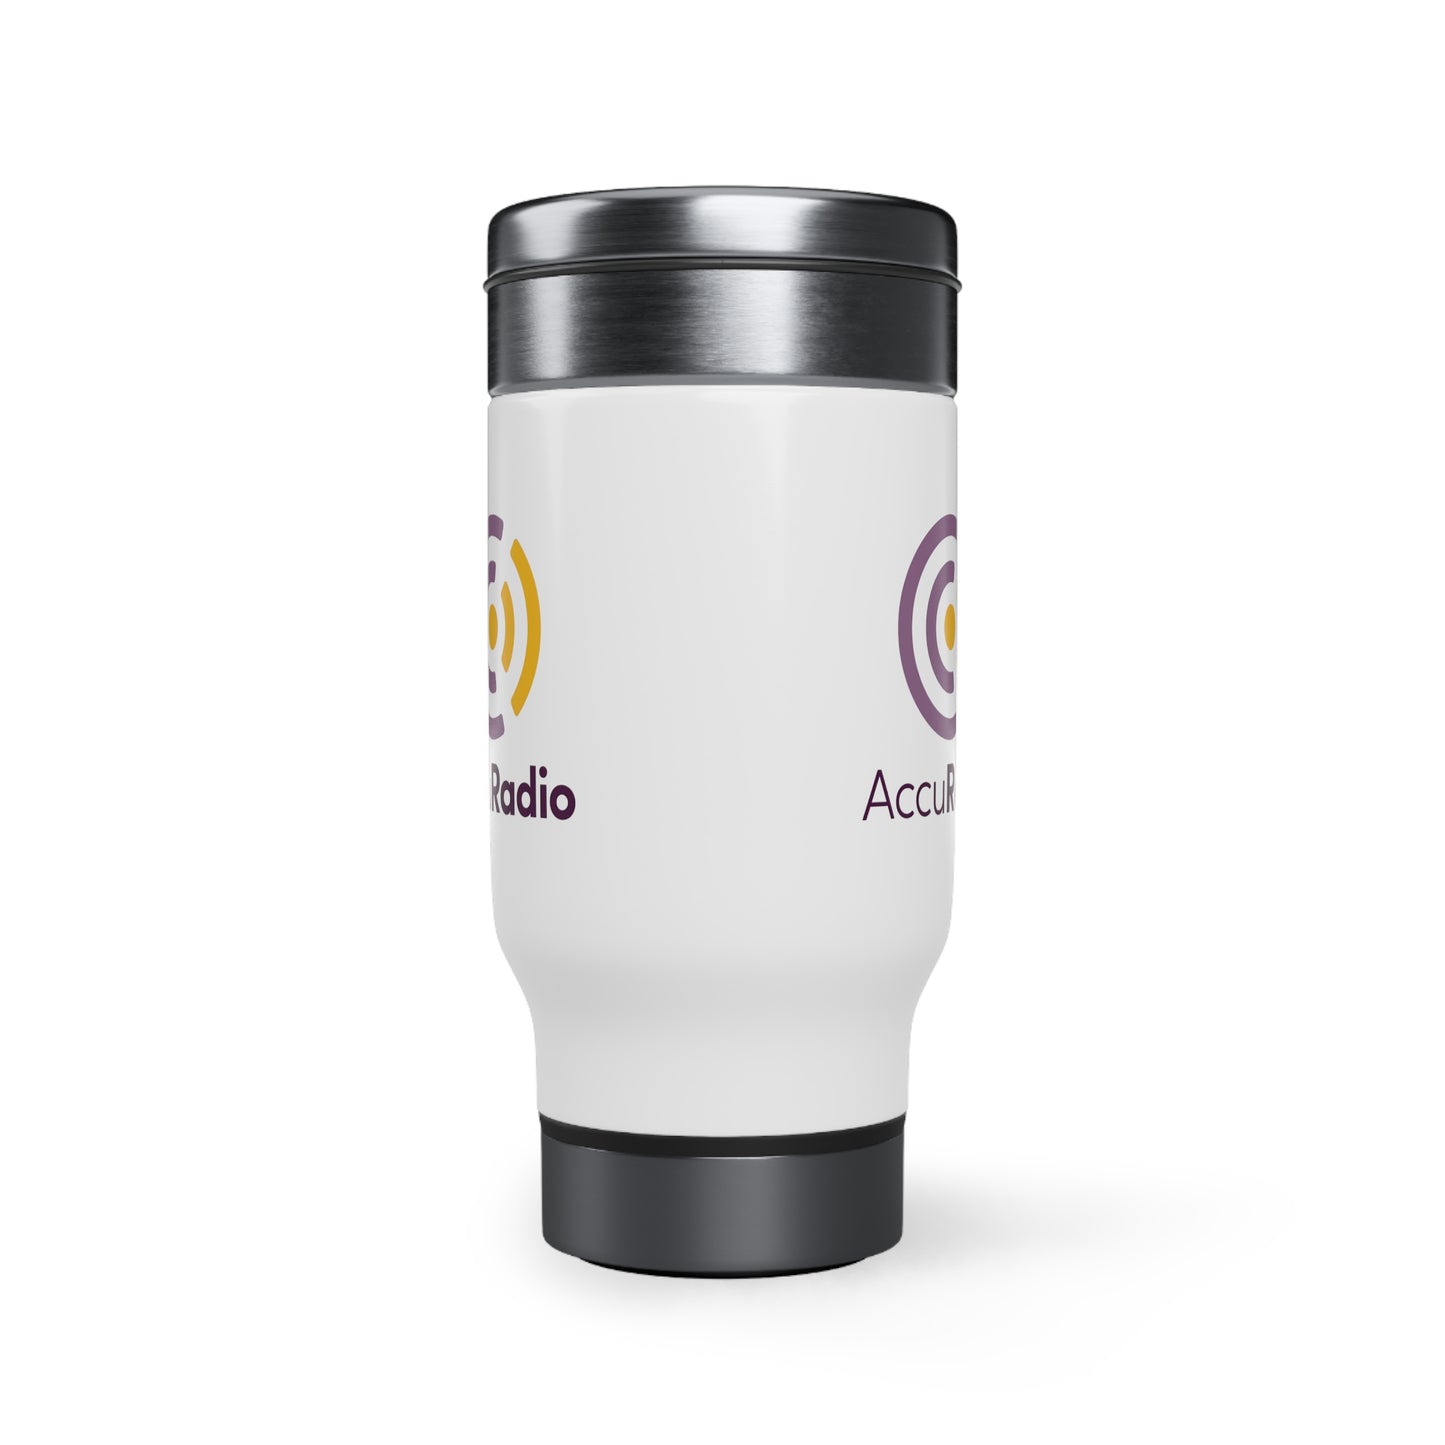 AccuRadio Stainless Steel Travel Mug with Handle